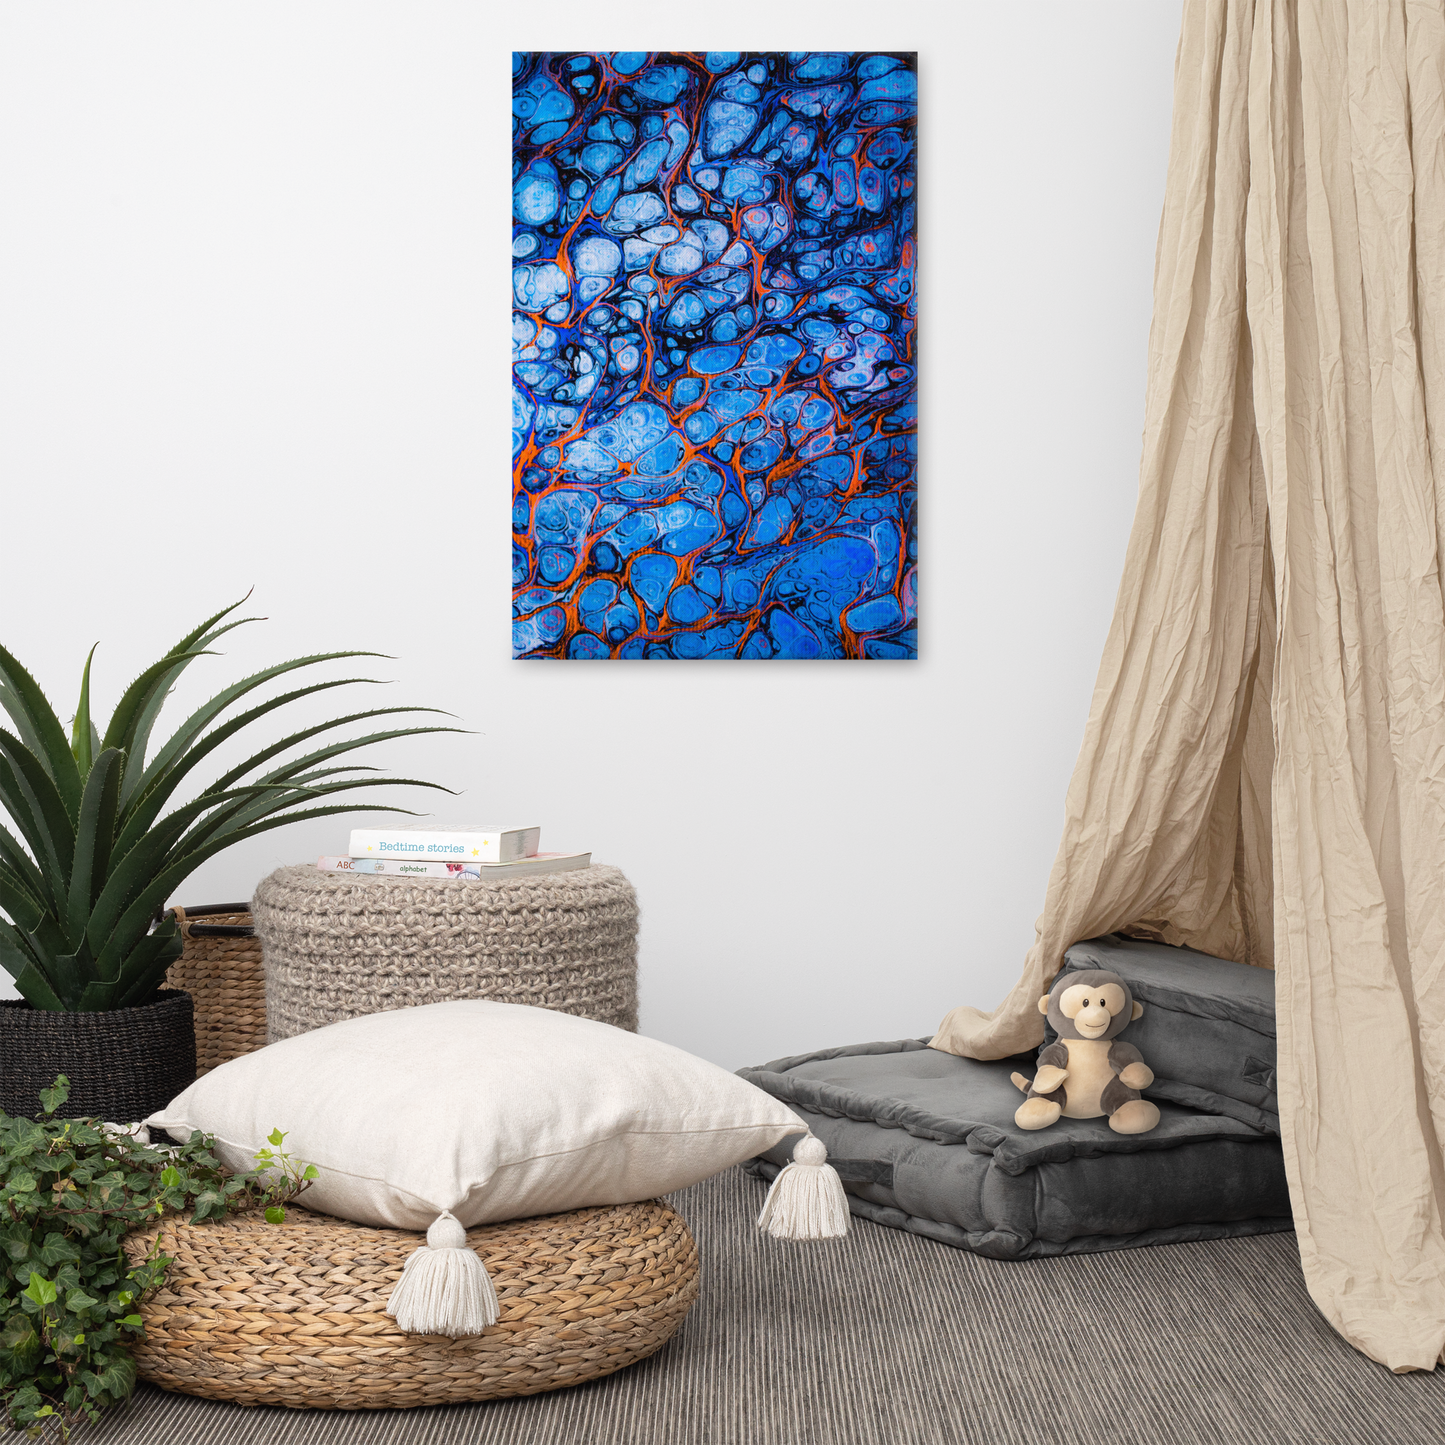 NightOwl Studio Abstract Wall Art, Blue Fire, Boho Living Room, Bedroom, Office, and Home Decor, Premium Canvas with Wooden Frame, Acrylic Painting Reproduction, 24” x 36”